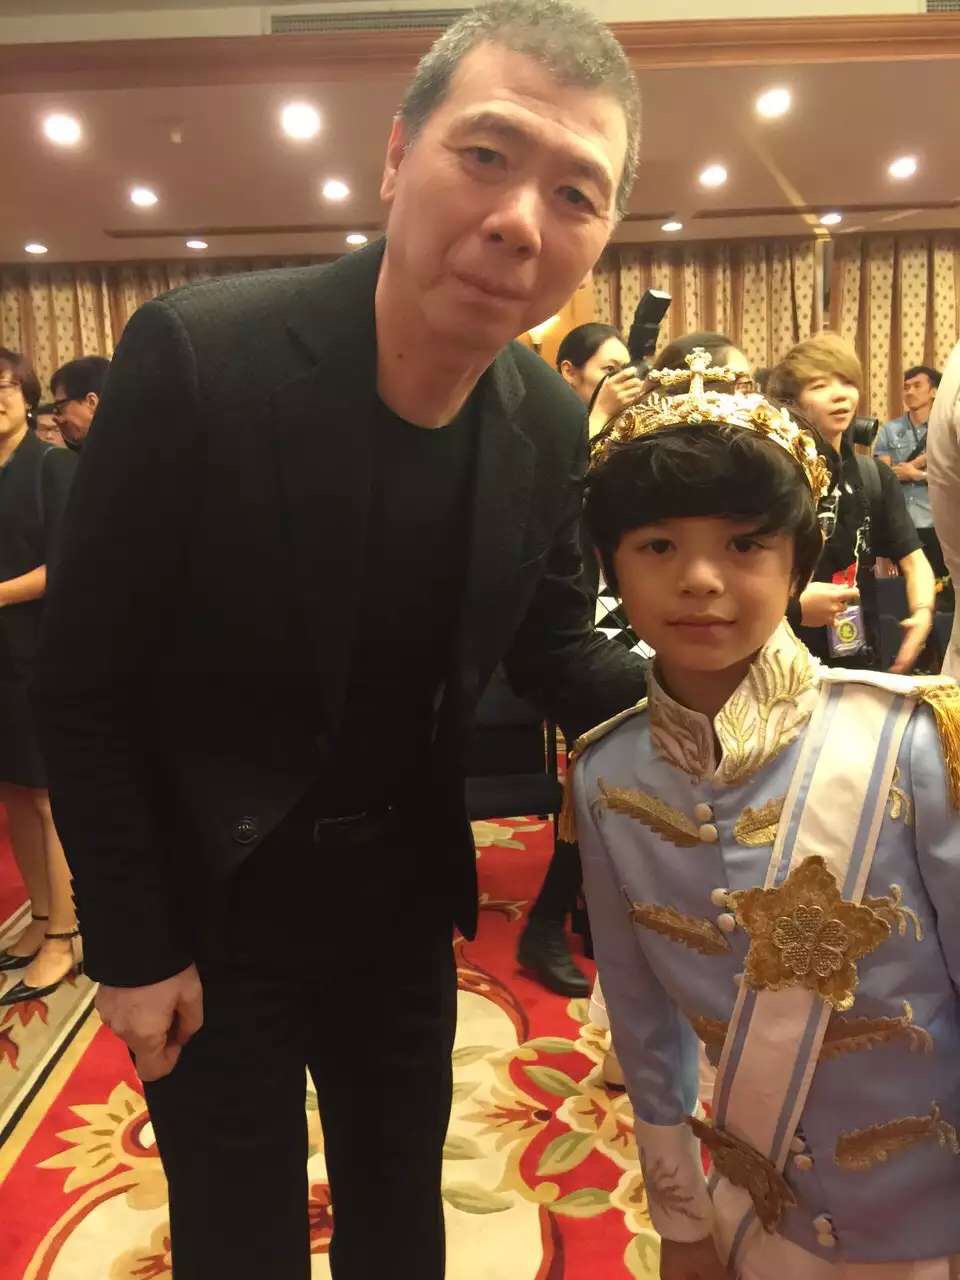 Feng Xiaogang (冯小刚) & Jozef Waite (西蒙子) at the Shanghai International Film Festival 2015 - Jackie Chan Action Movie Week Gala Night.